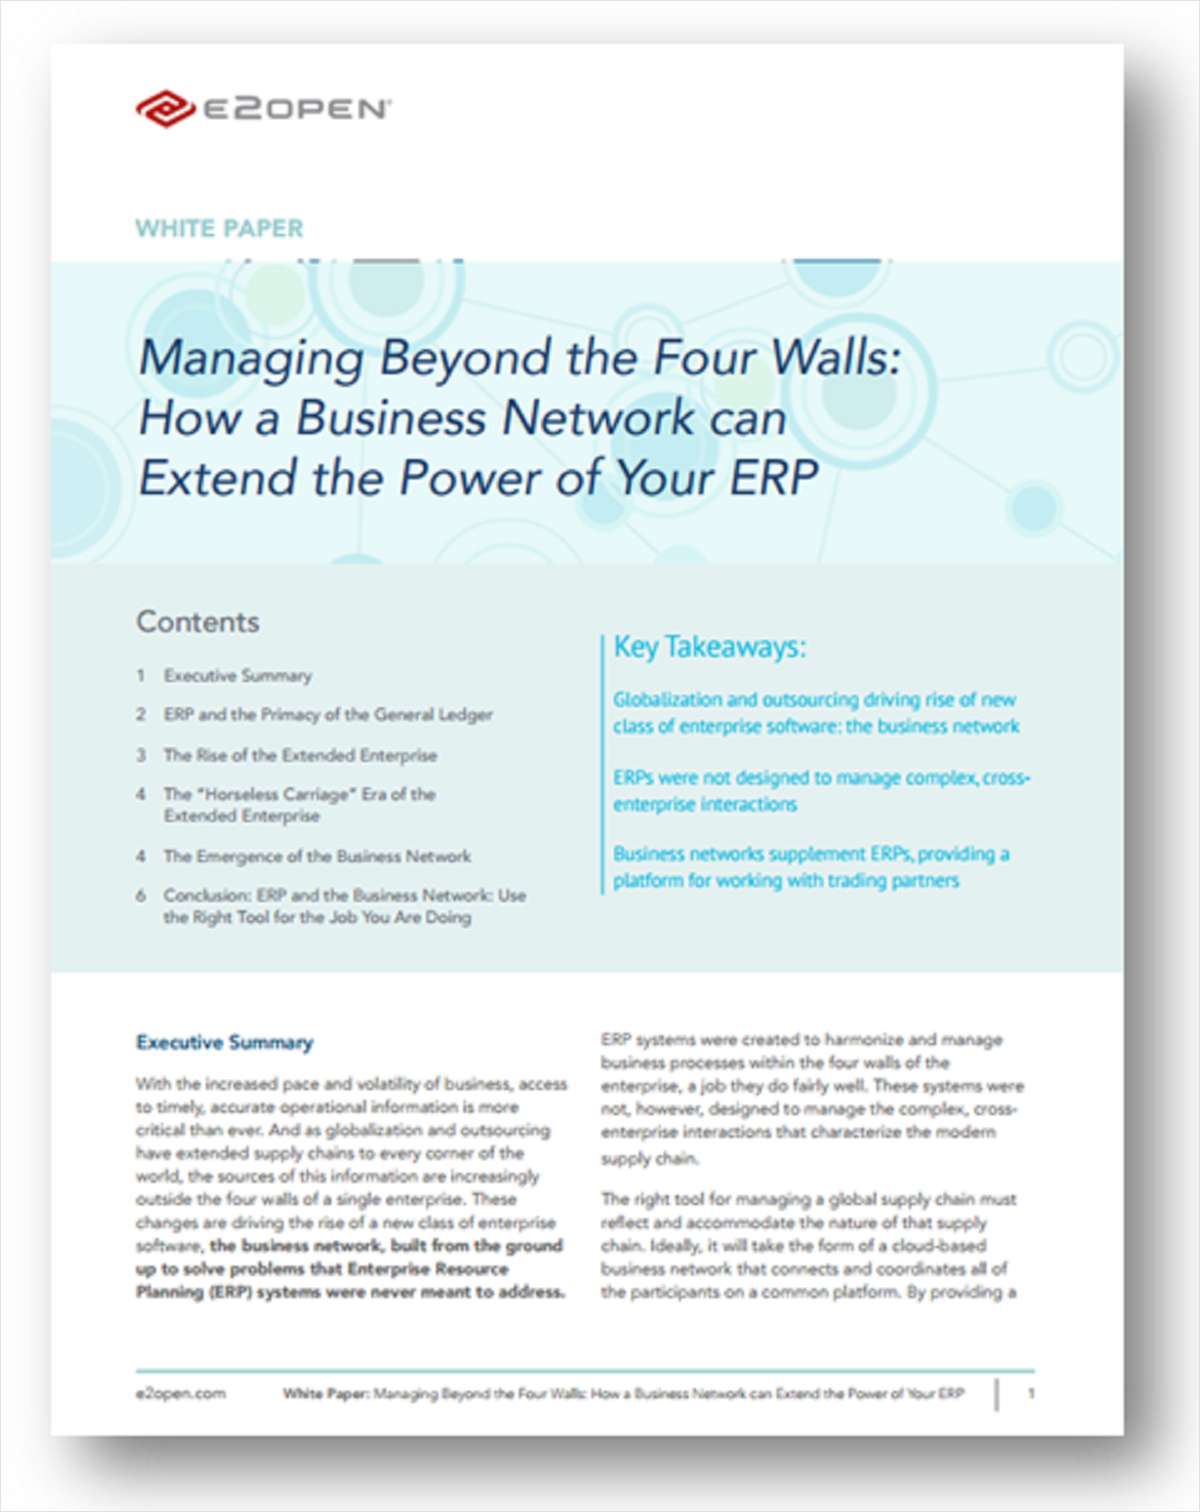 Managing Beyond the Four Walls: How a Business Network can Extend the Power of Your ERP